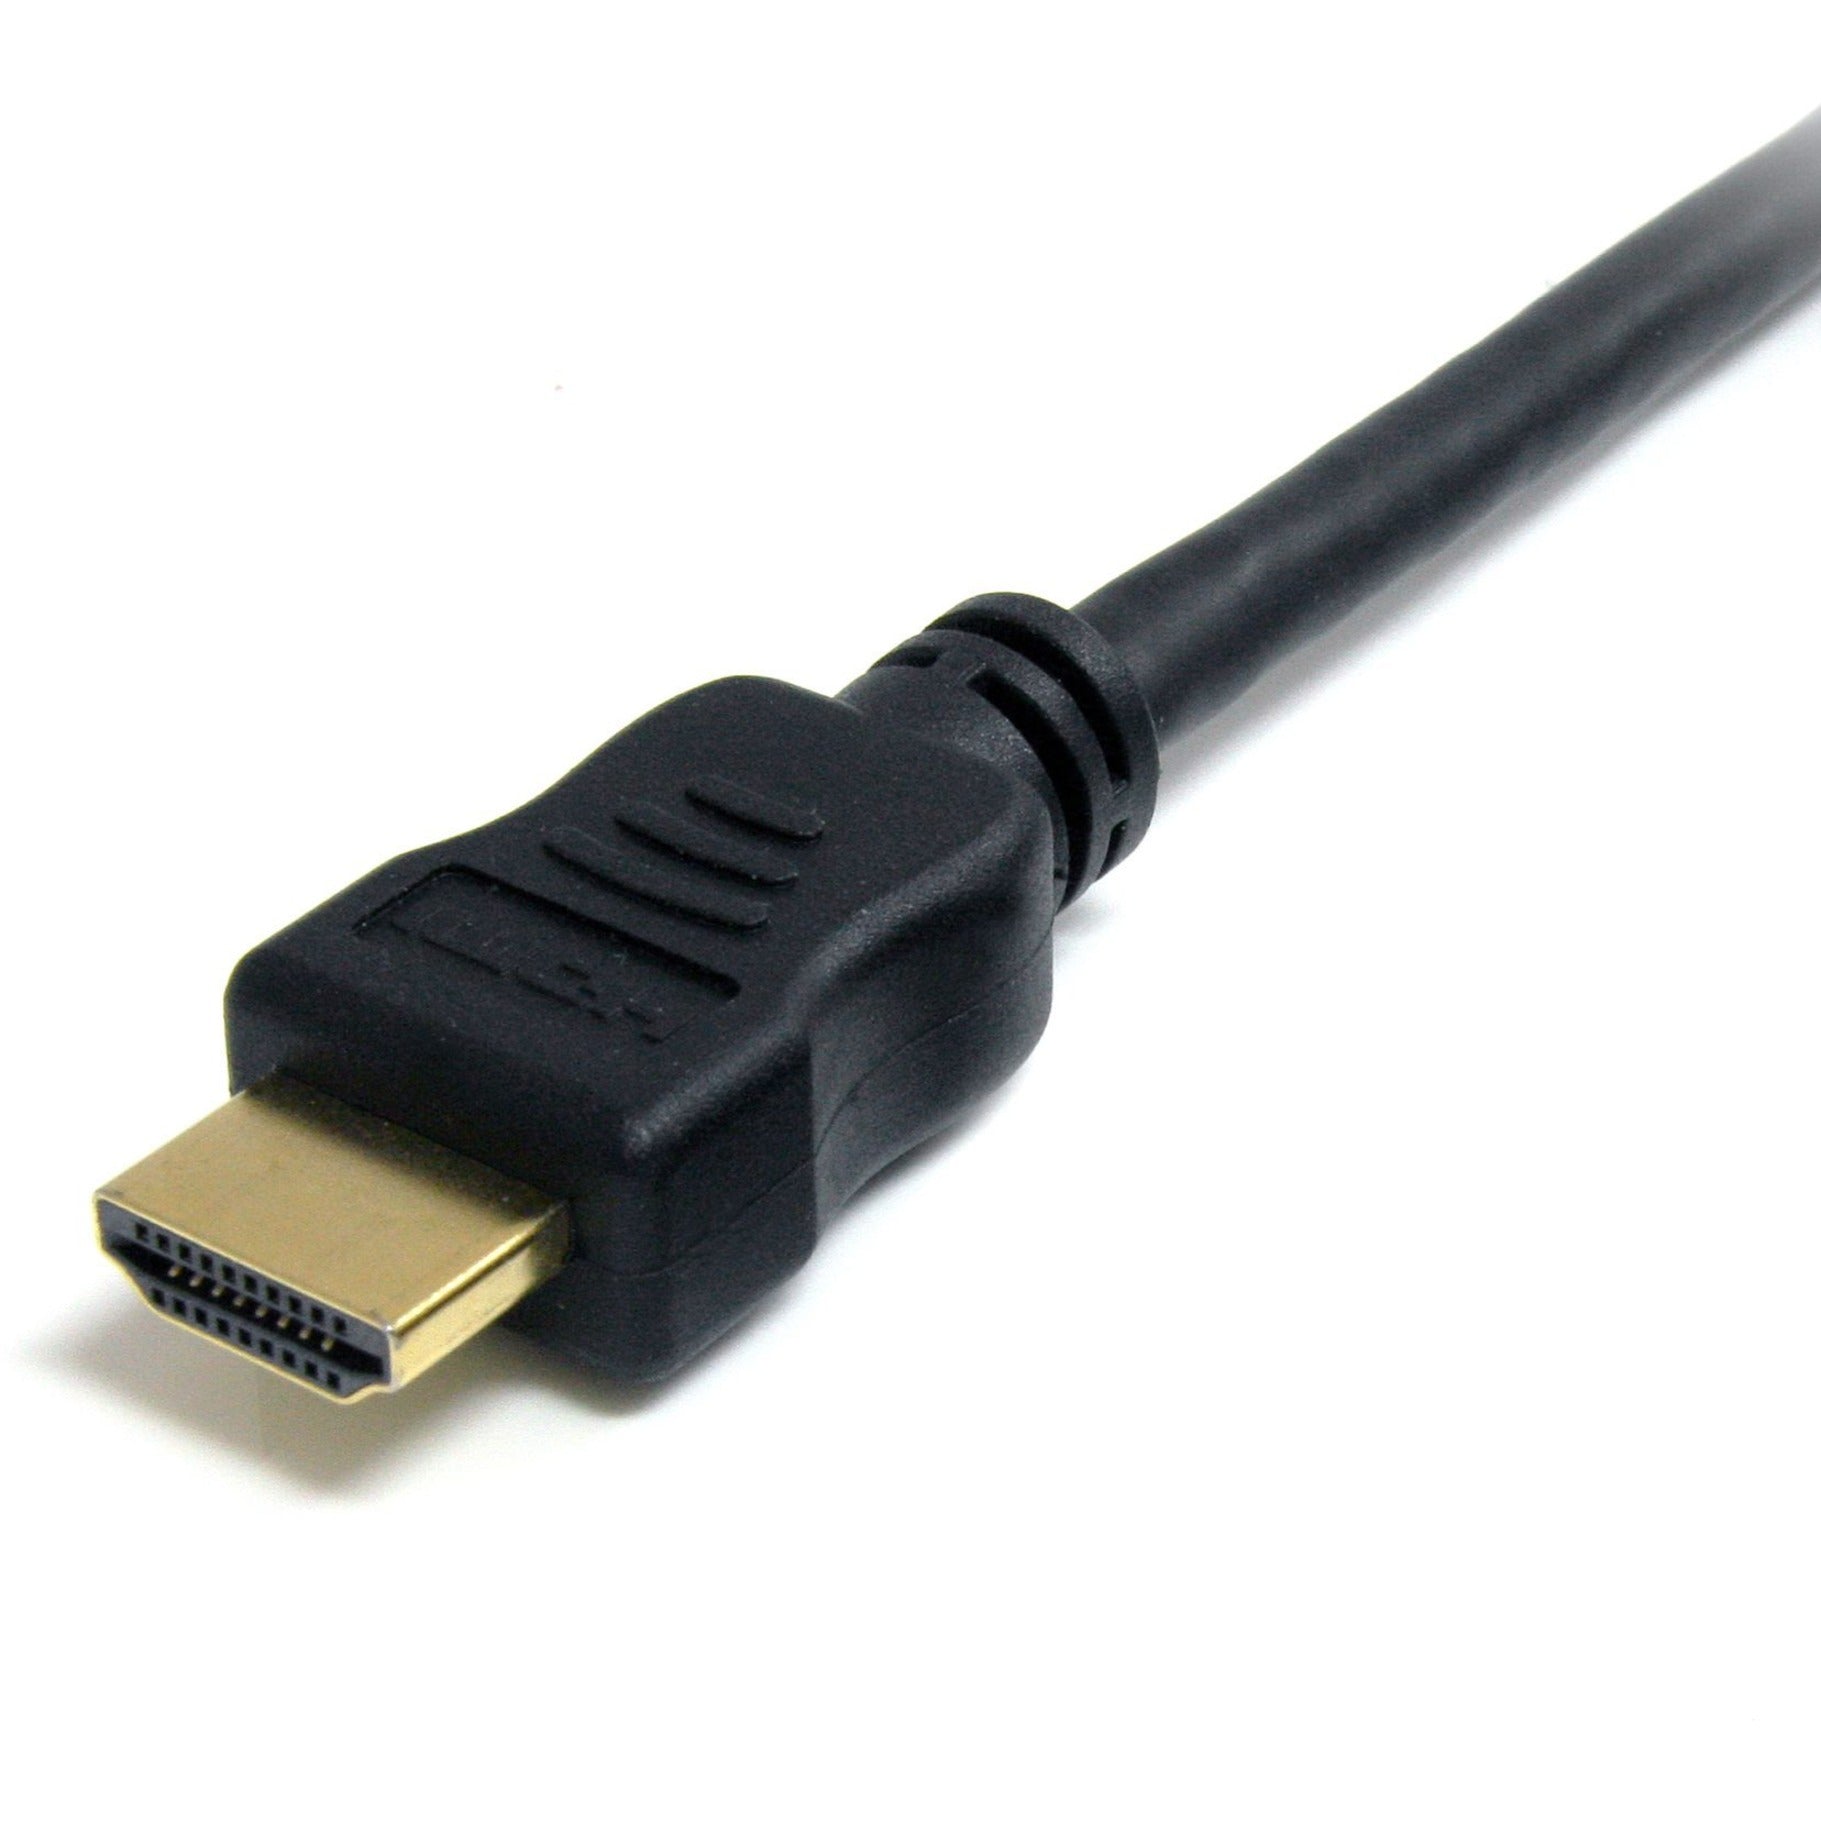 StarTech.com HDMIMM15HS 15 ft High Speed HDMI Digital Video Cable with Ethernet, Corrosion Resistant, 4096 x 2160 Supported Resolution